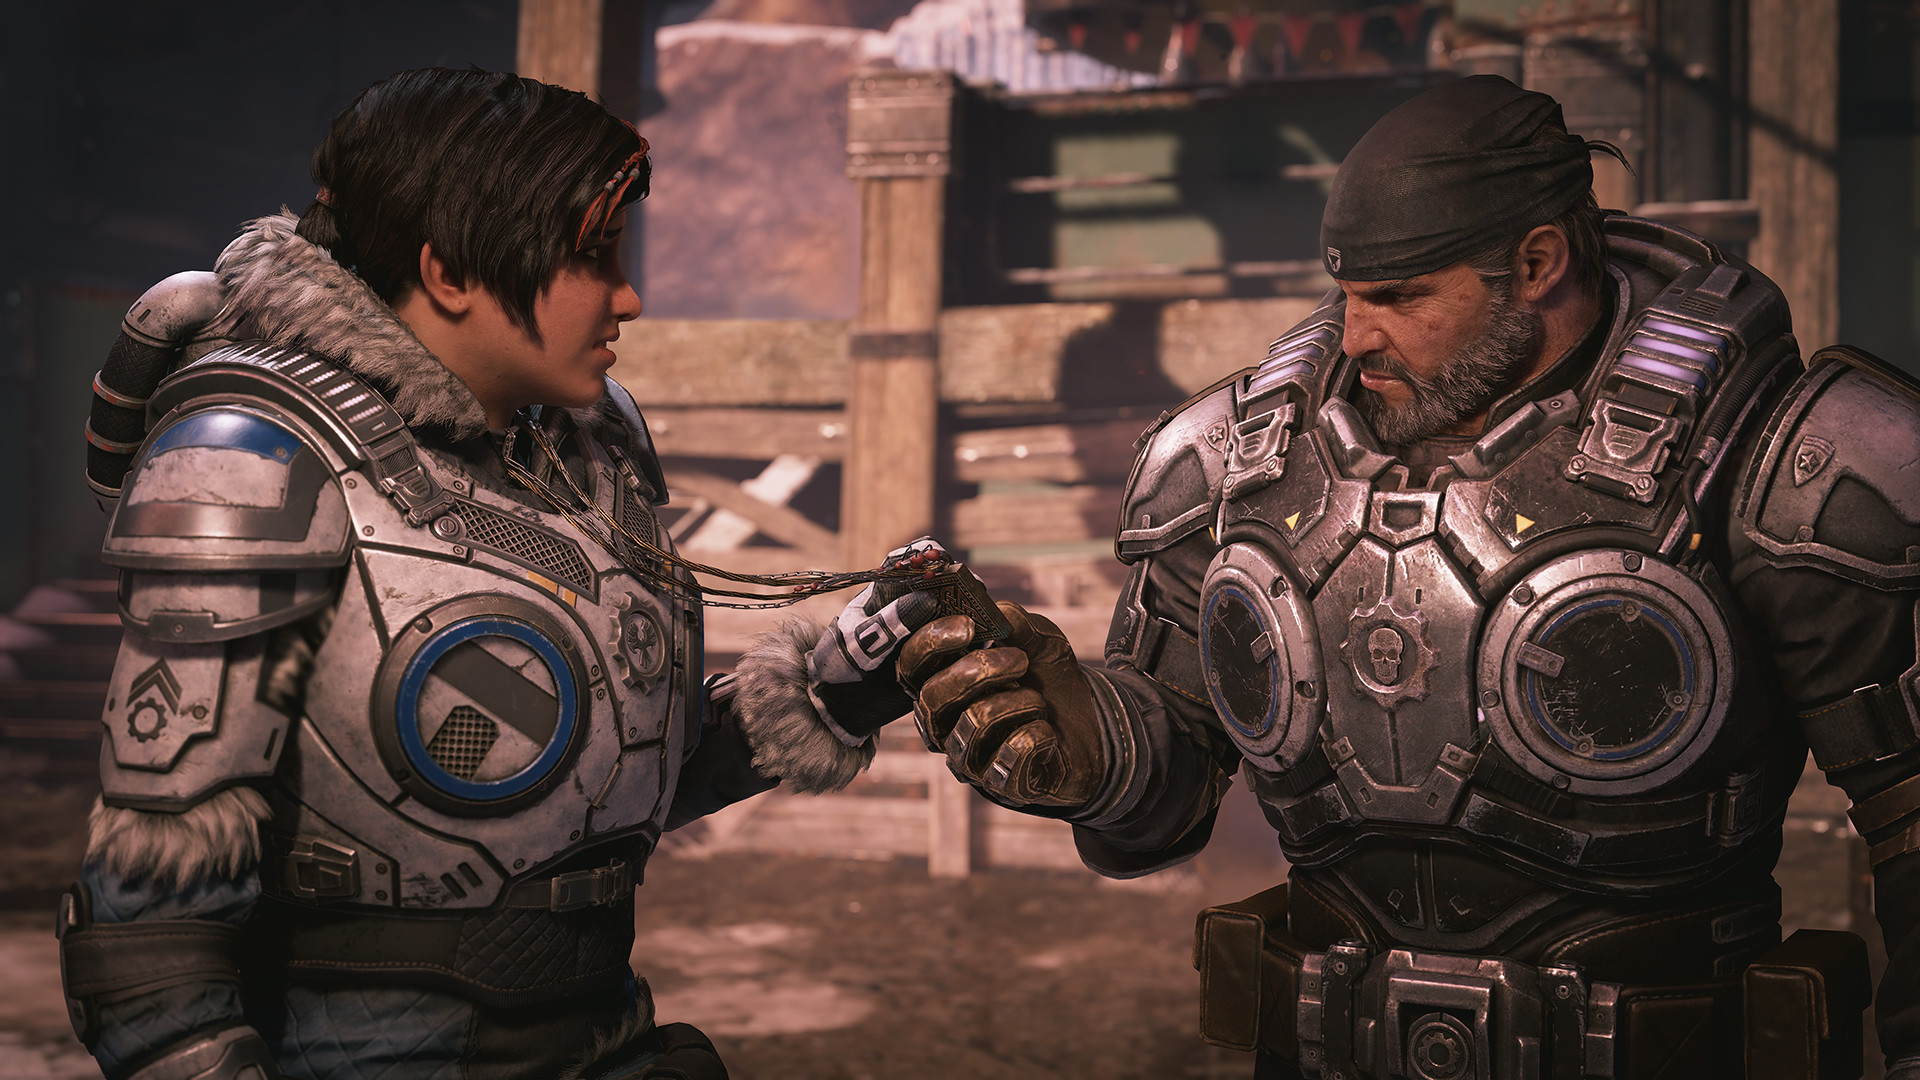 Save 75% on Gears 5 on Steam